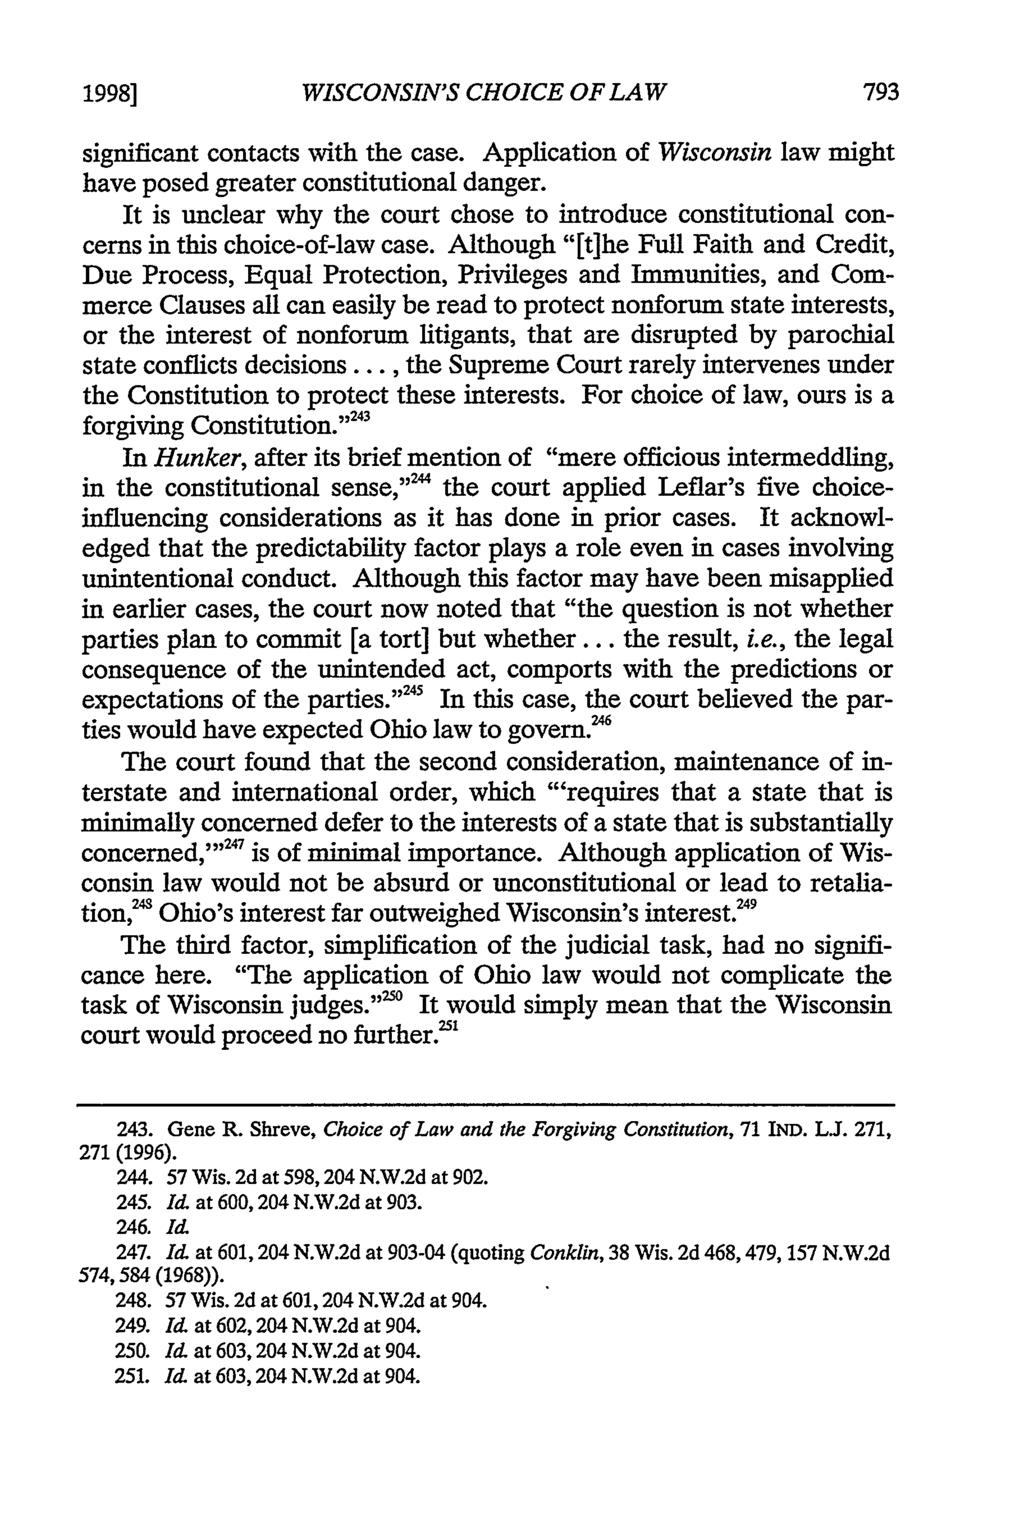 1998] WISCONSIN'S CHOICE OF LAW significant contacts with the case. Application of Wisconsin law might have posed greater constitutional danger.